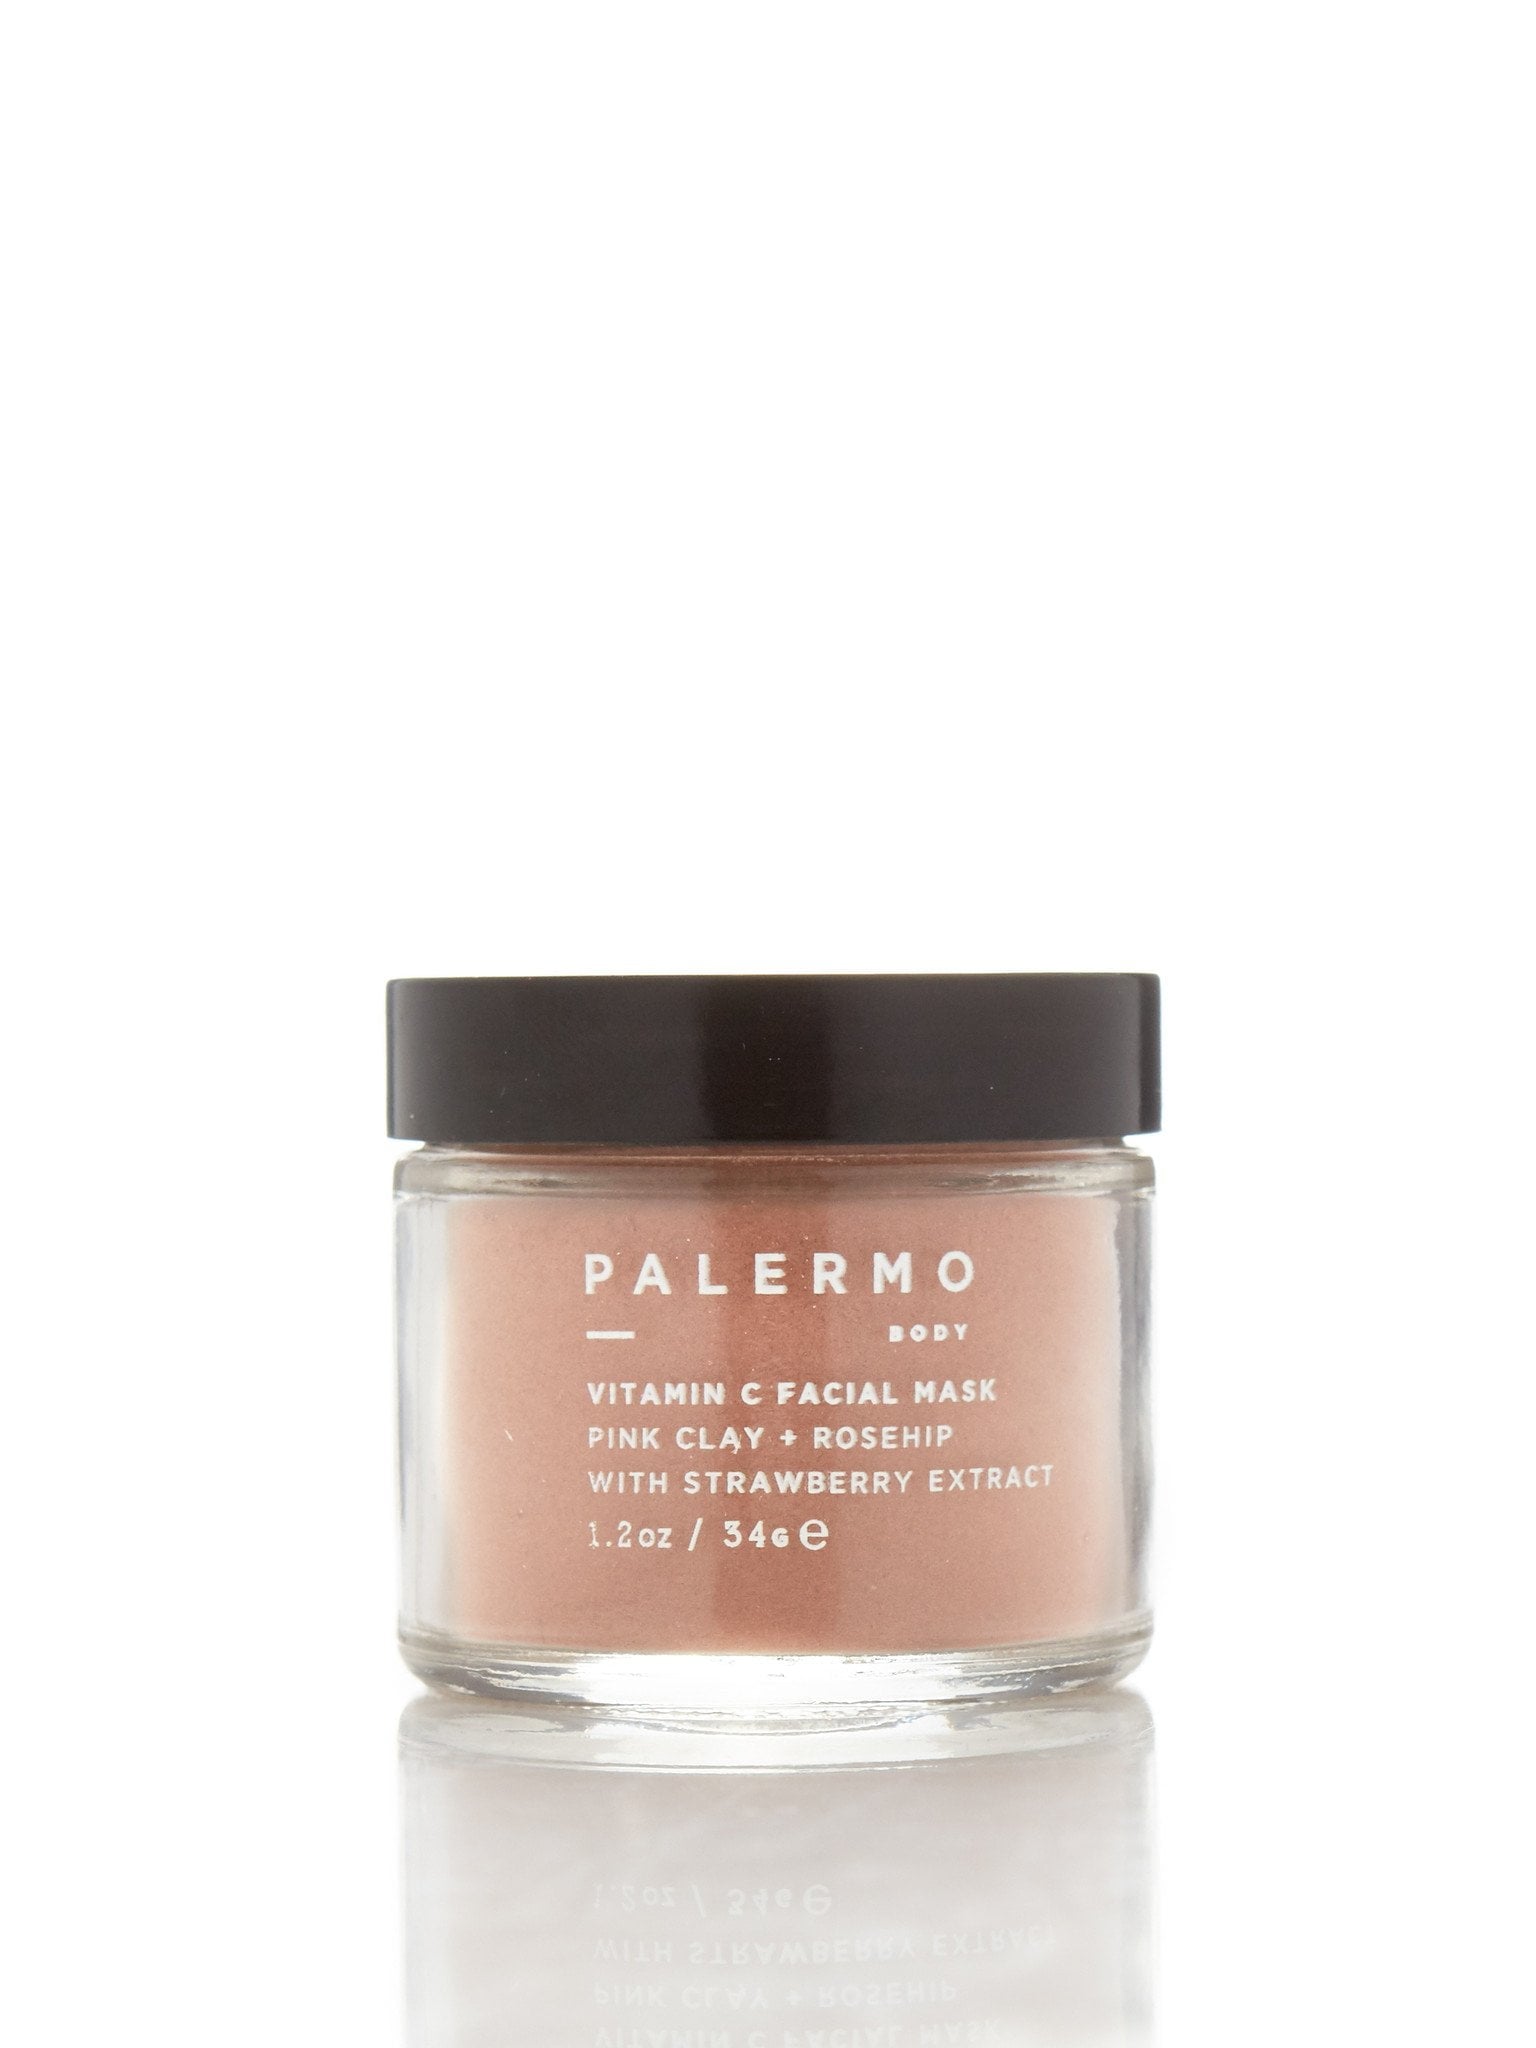 Vitamin C Facial Mask by Palermo Body - Lotus and Willow